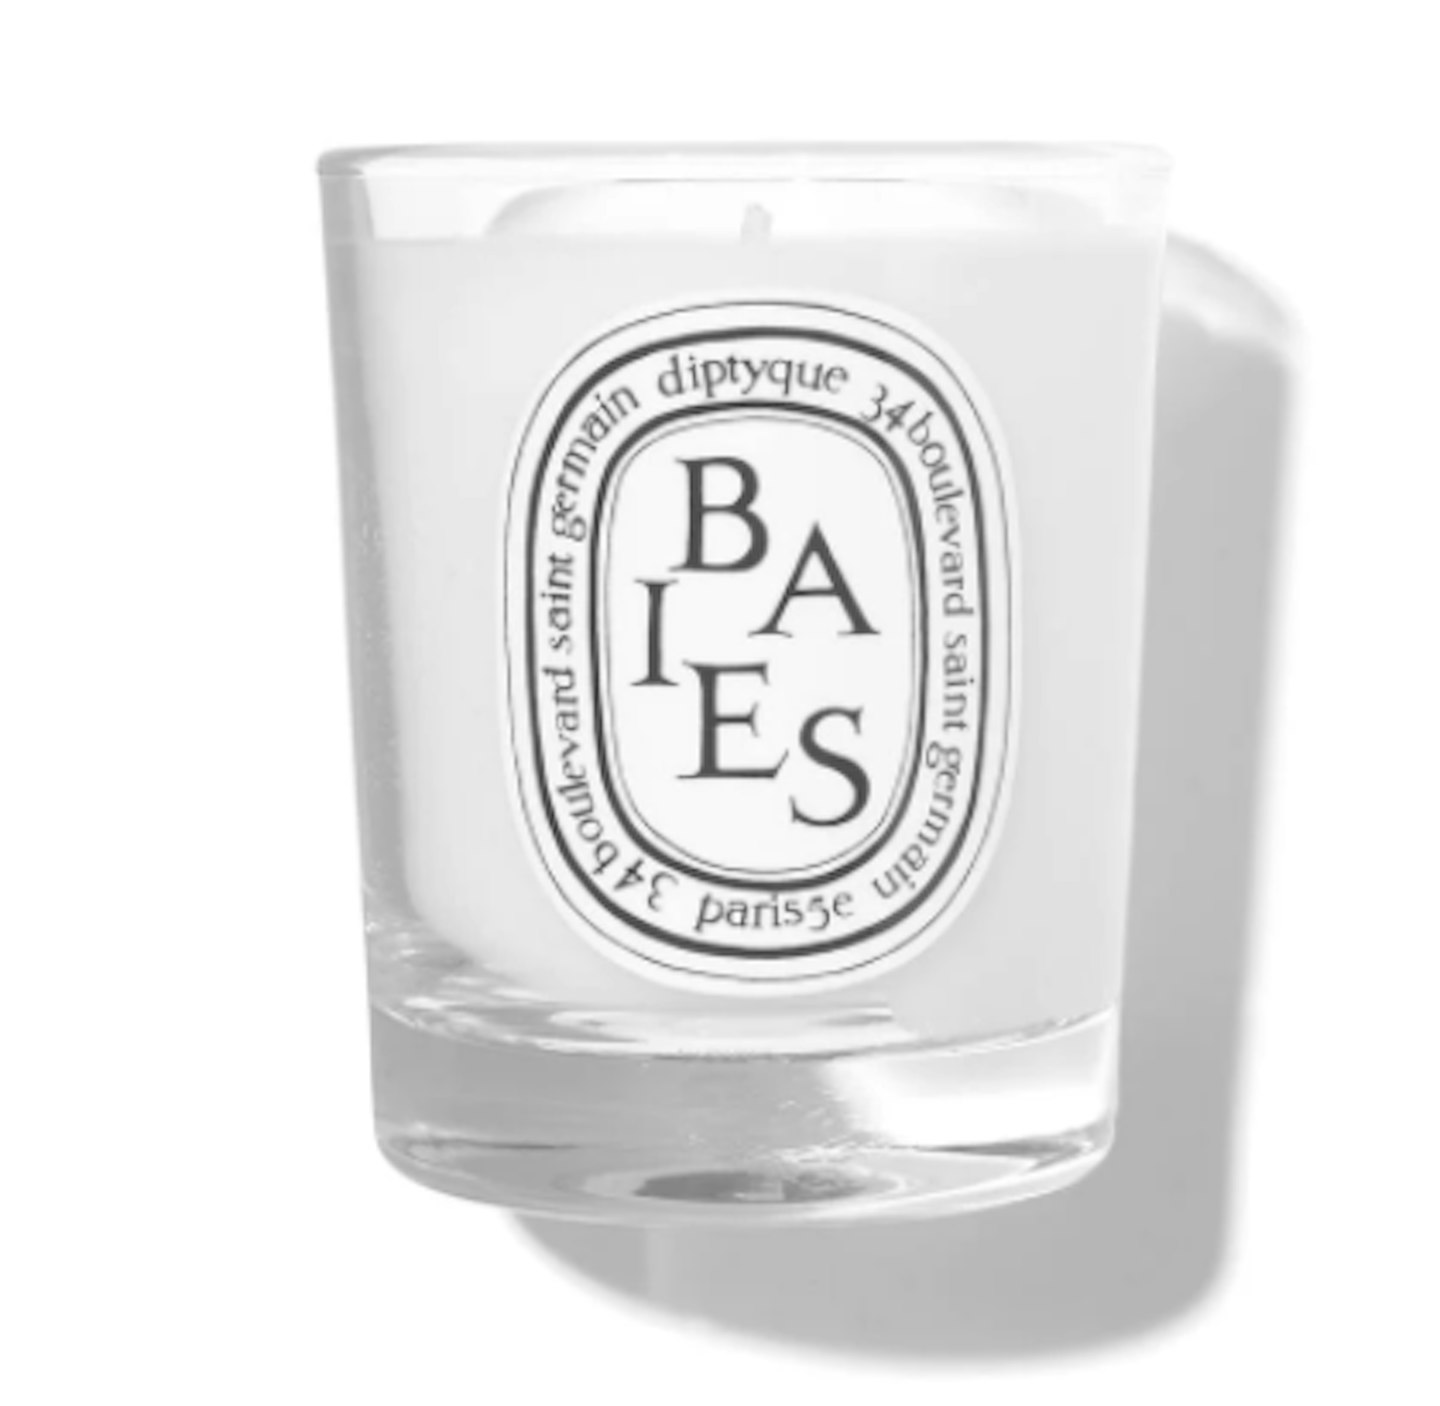 Baies Scented Candle by Diptyque